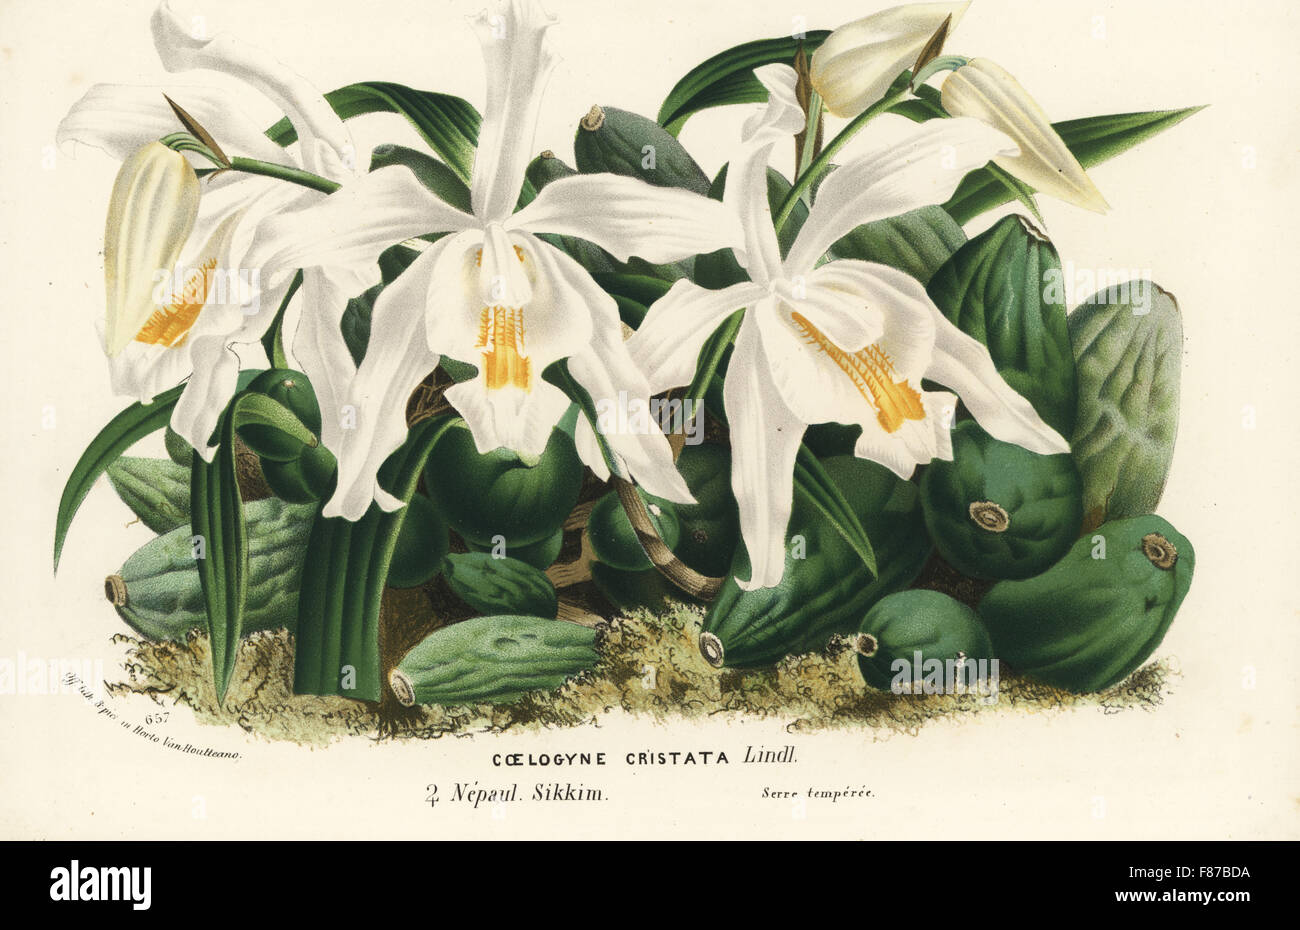 Coelogyne cristata orchid. Handcoloured lithograph from Louis van Houtte and Charles Lemaire's Flowers of the Gardens and Hothouses of Europe, Flore des Serres et des Jardins de l'Europe, Ghent, Belgium, 1867-1868. Stock Photo